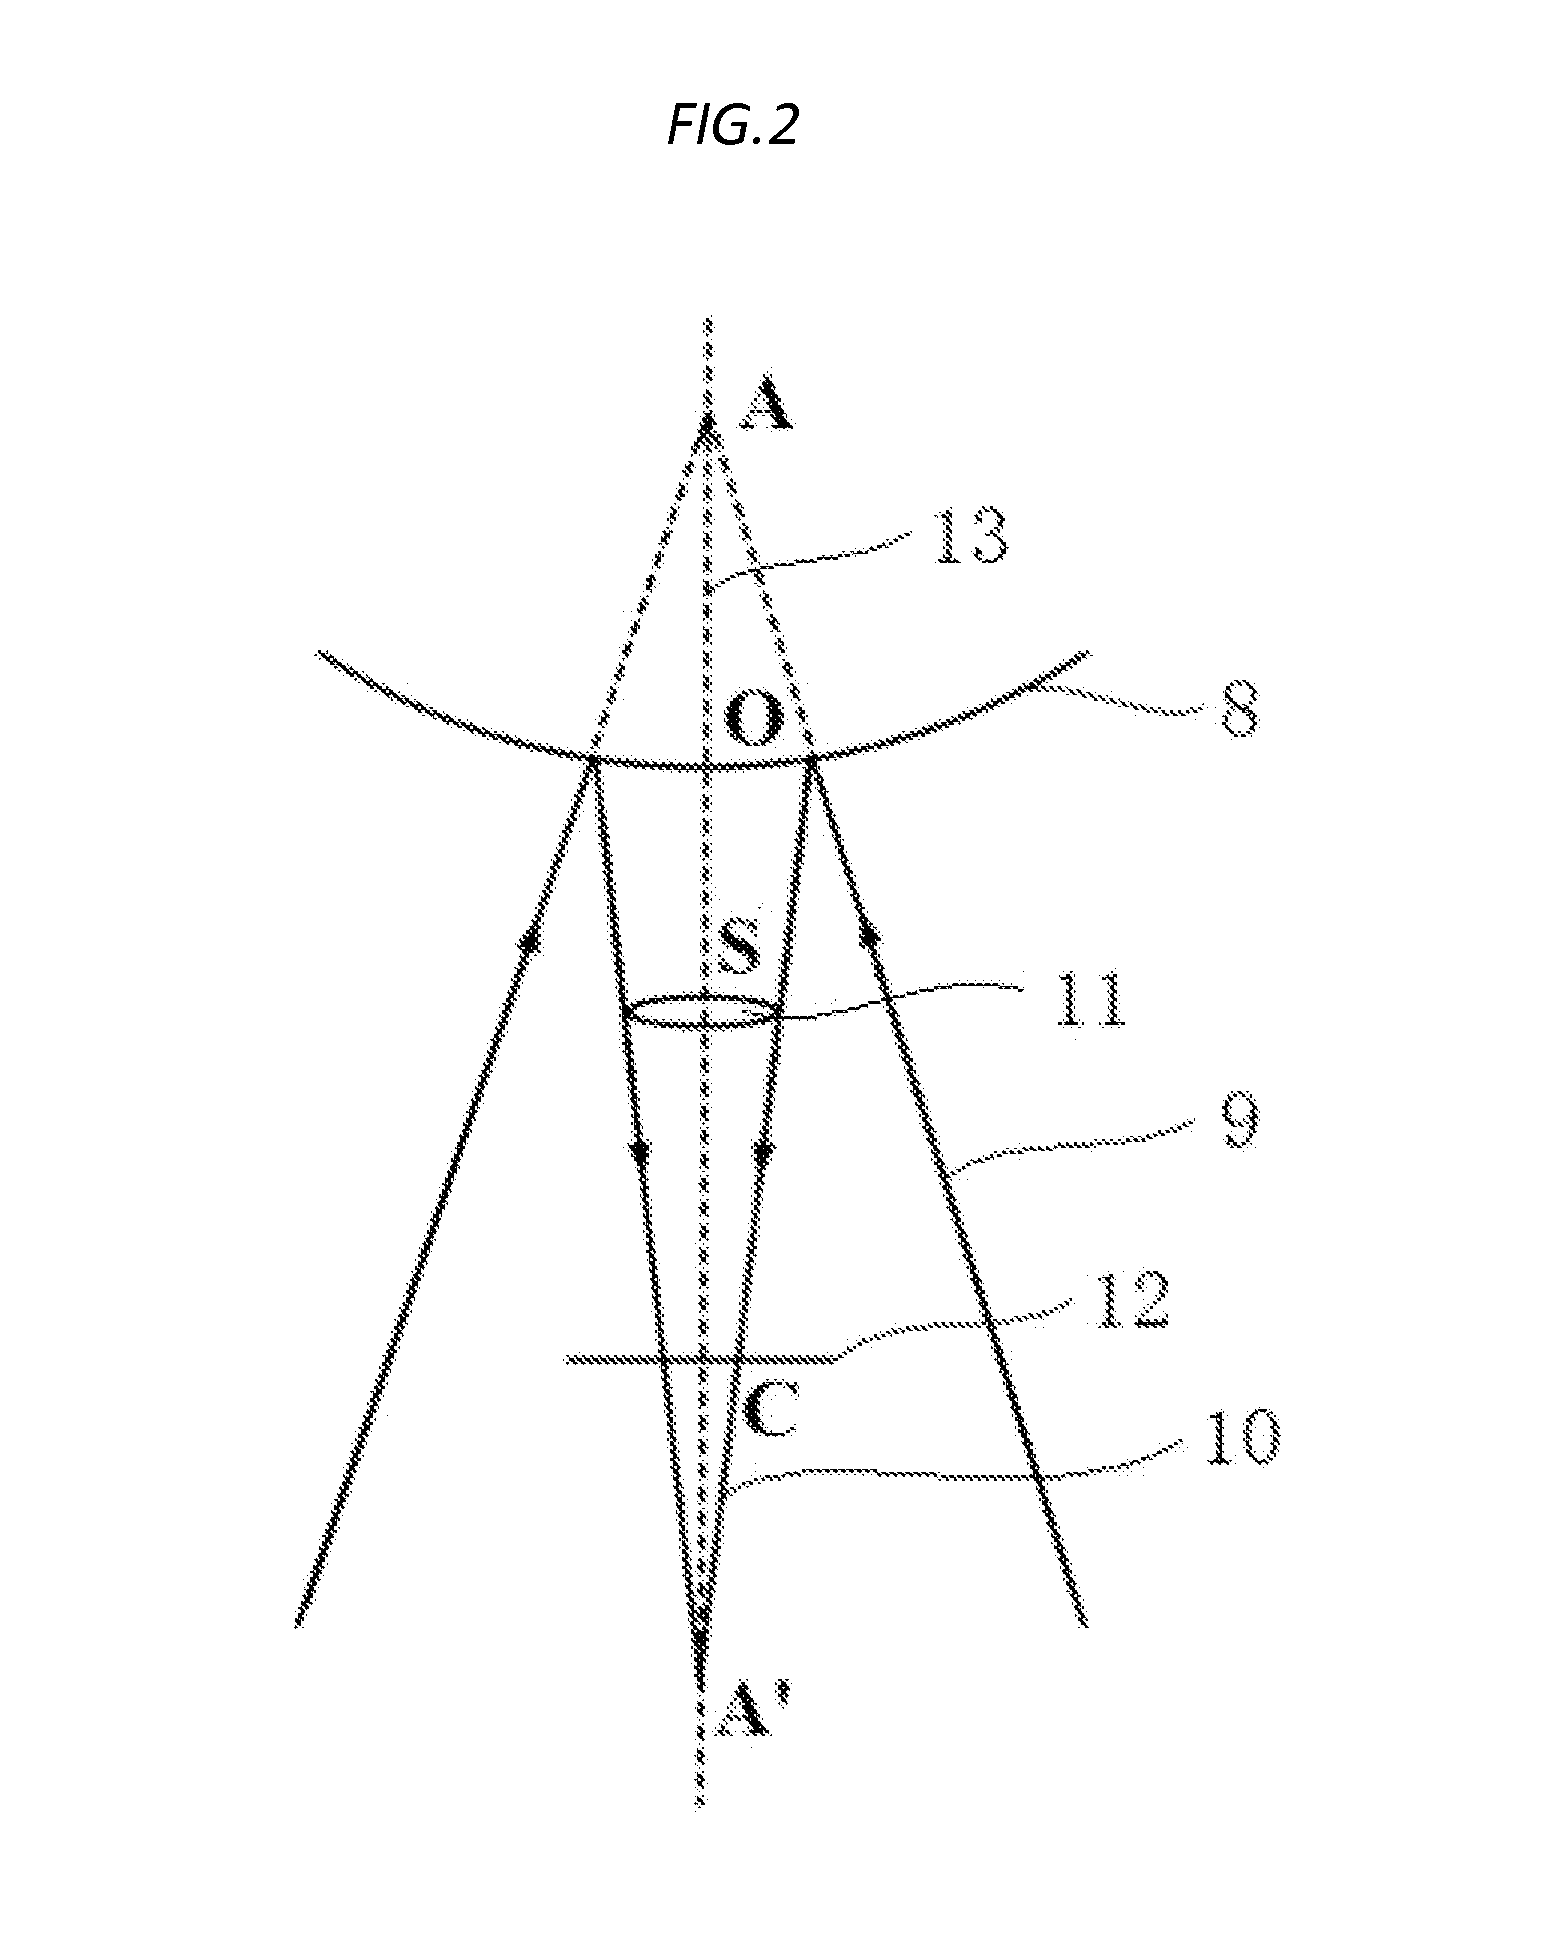 Handheld apparatus for measuring lens surface power